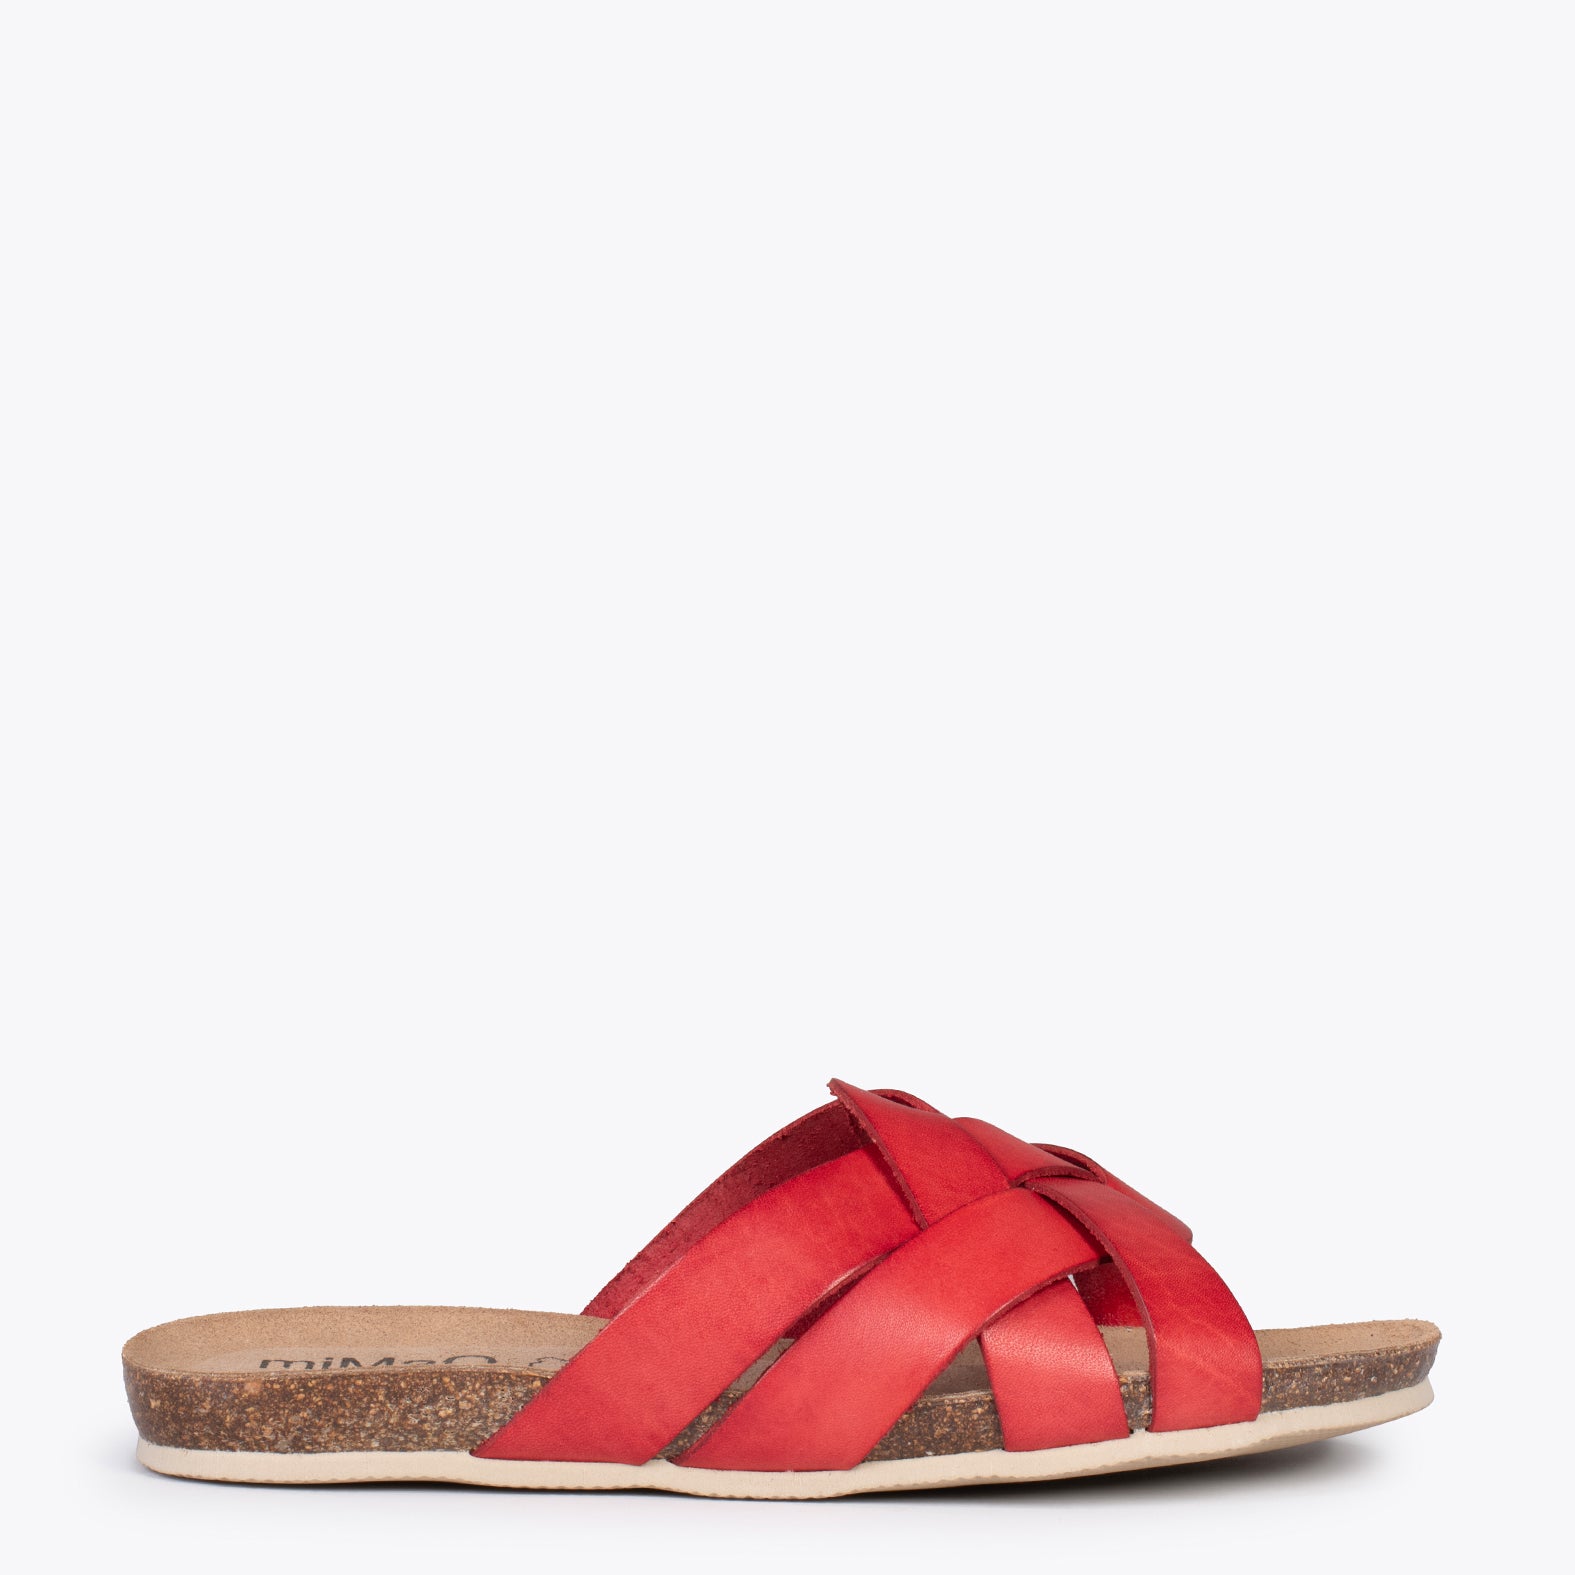 DHALIA – RED slides with braided upper